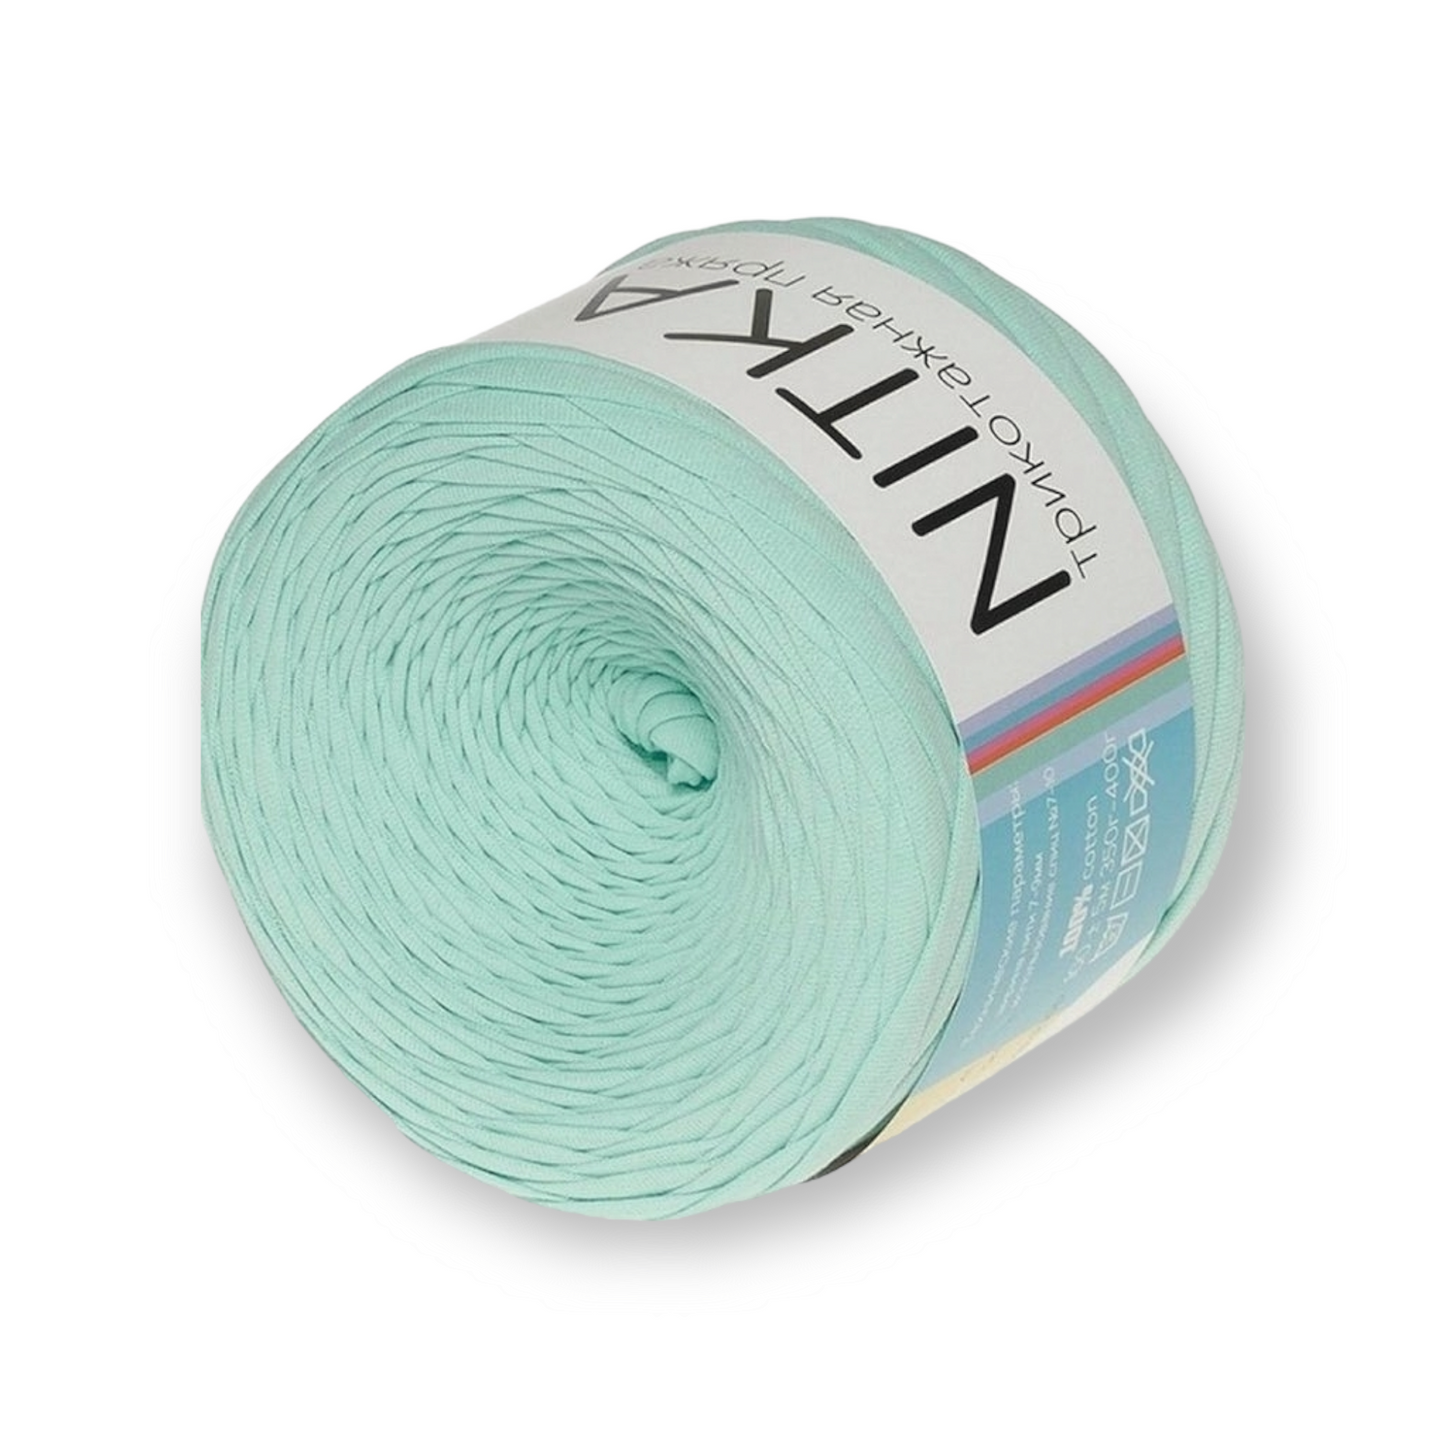 Color gradient yarn NITKA textile yarn from Russia 100% cotton 1A quality 100 meters roll always constant width jersey ribbon jersey yarn